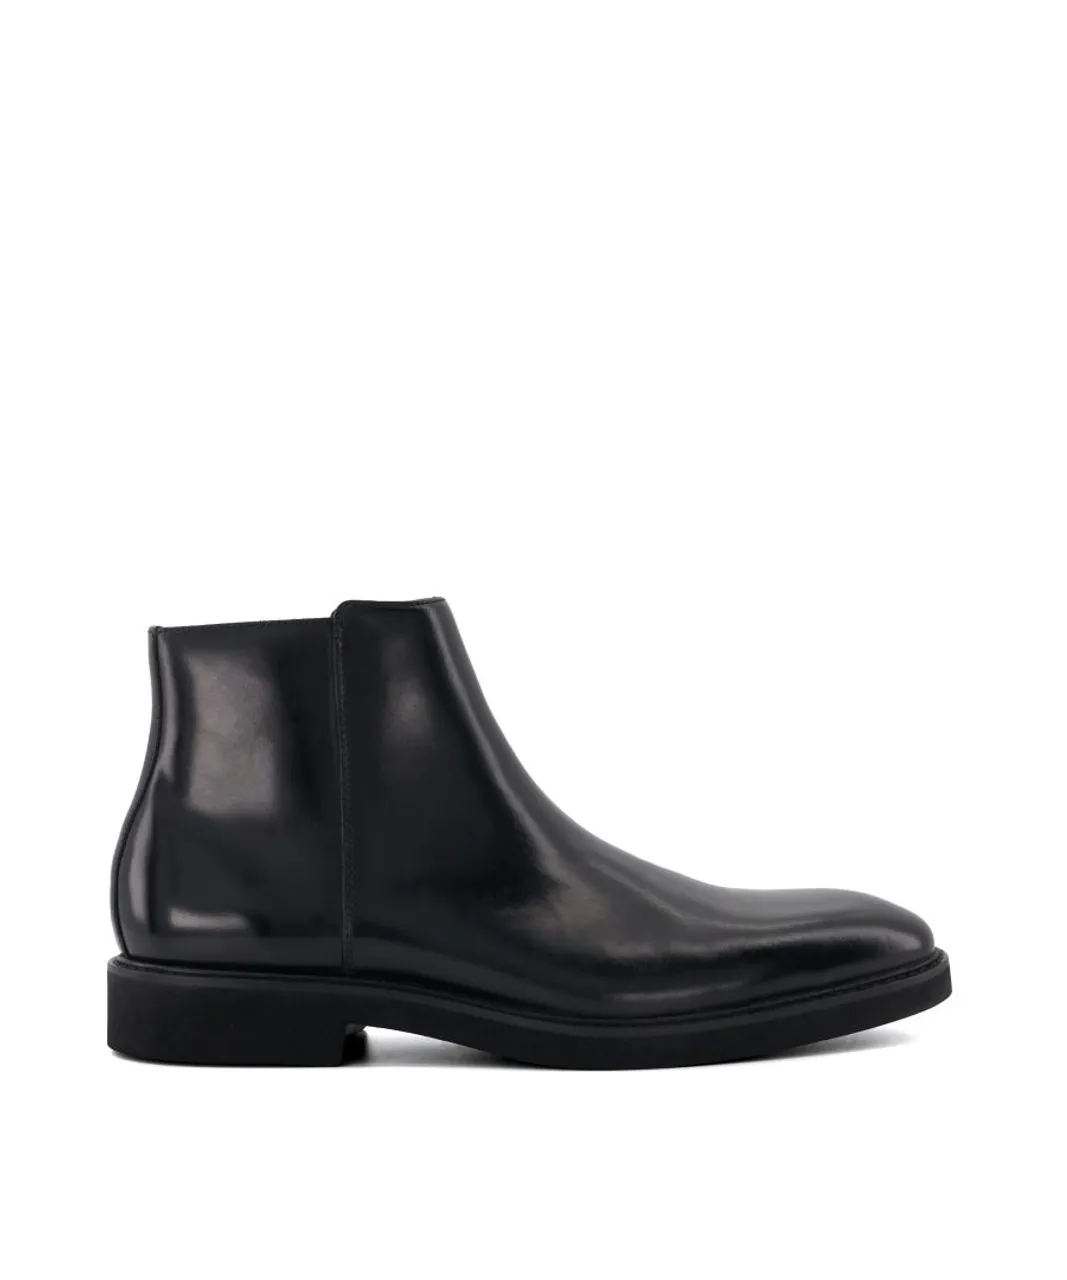 Dune London Mens Mccoy - Casual Ankle Boots - Black Leather (archived)